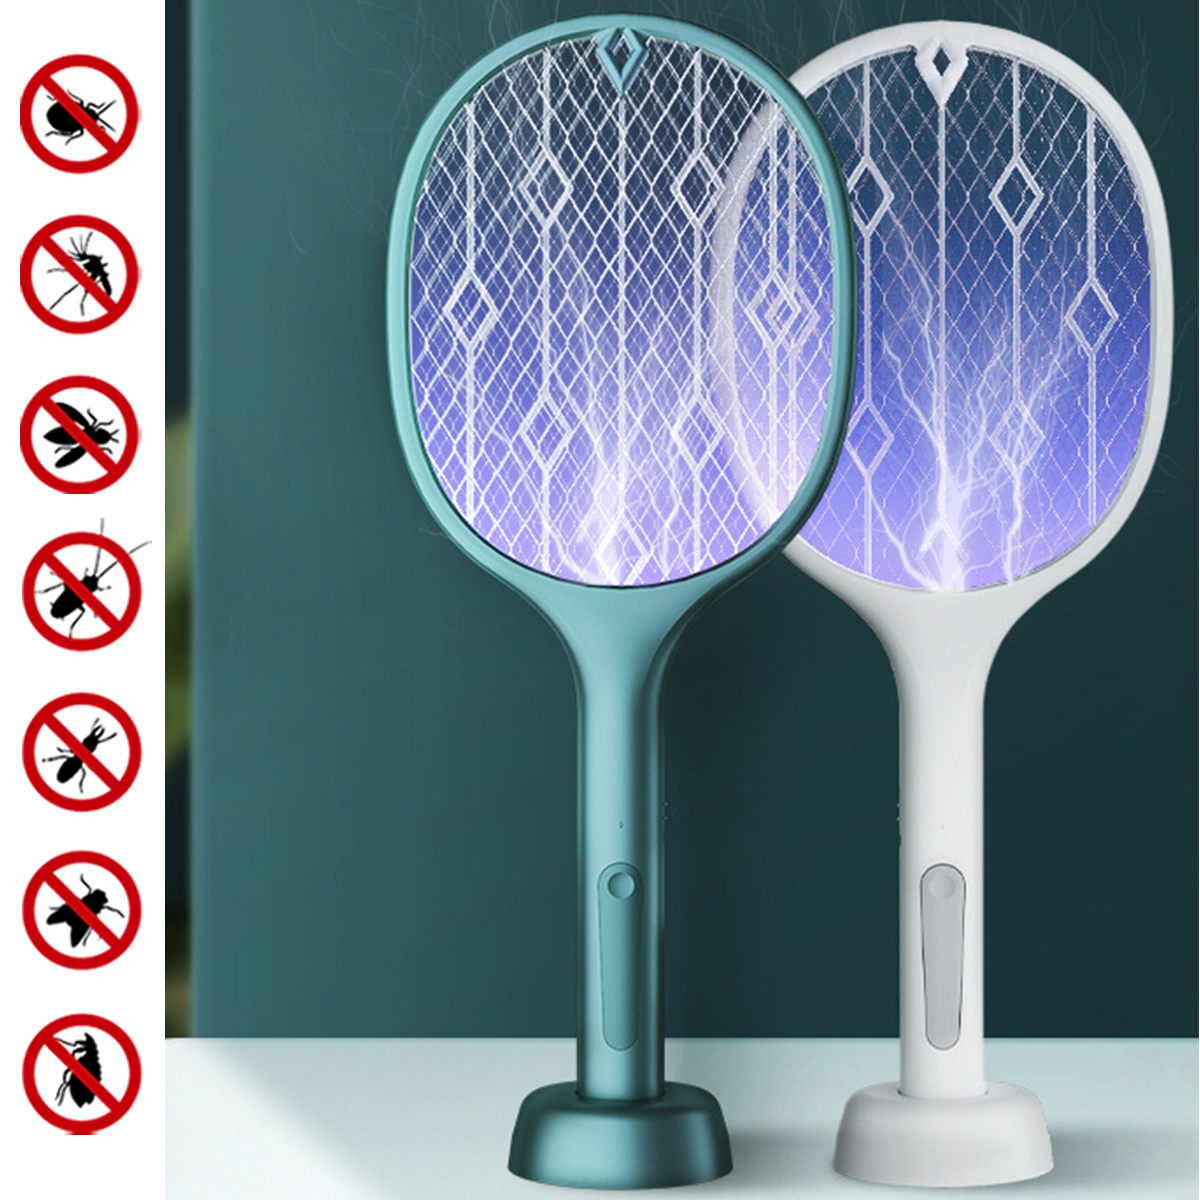 2-In-1-3000V-Electric-Mosquito-Swatter-Dual-Mode-Built-in-Battery-USB-Rechargeable-Outdoor-Home-Mosq-1871987-3